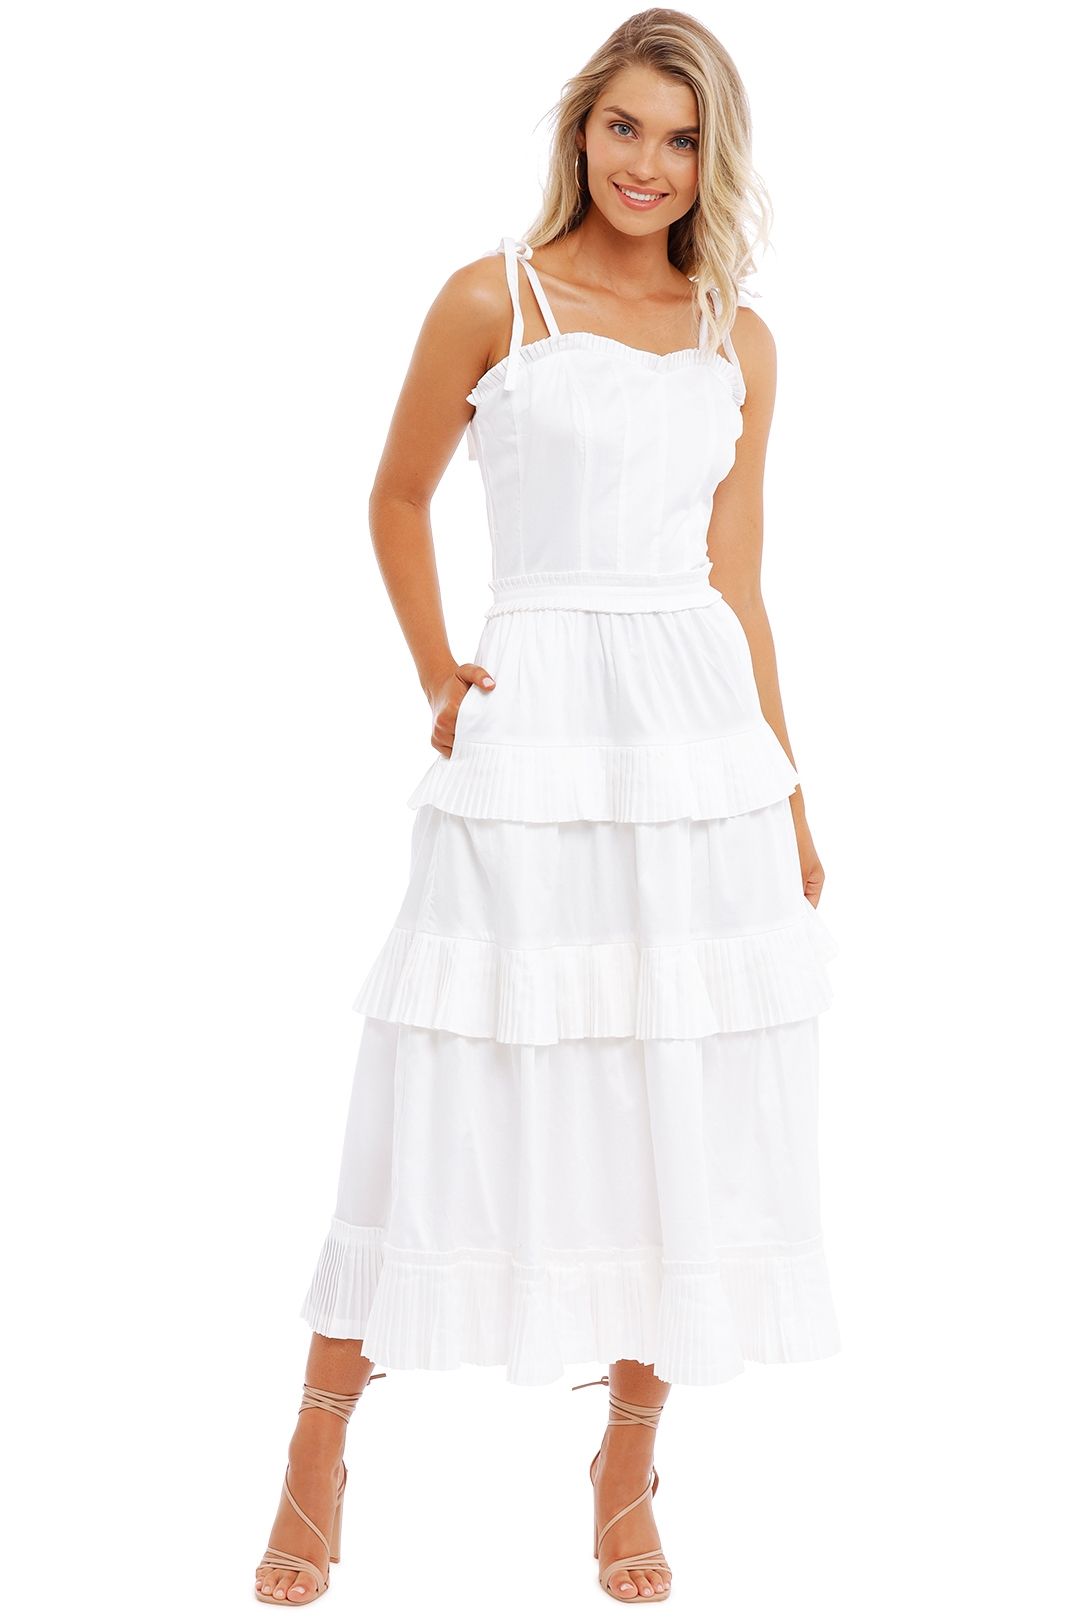 Ministry of Style Golden Fields Pleated Midi Dress White tiered